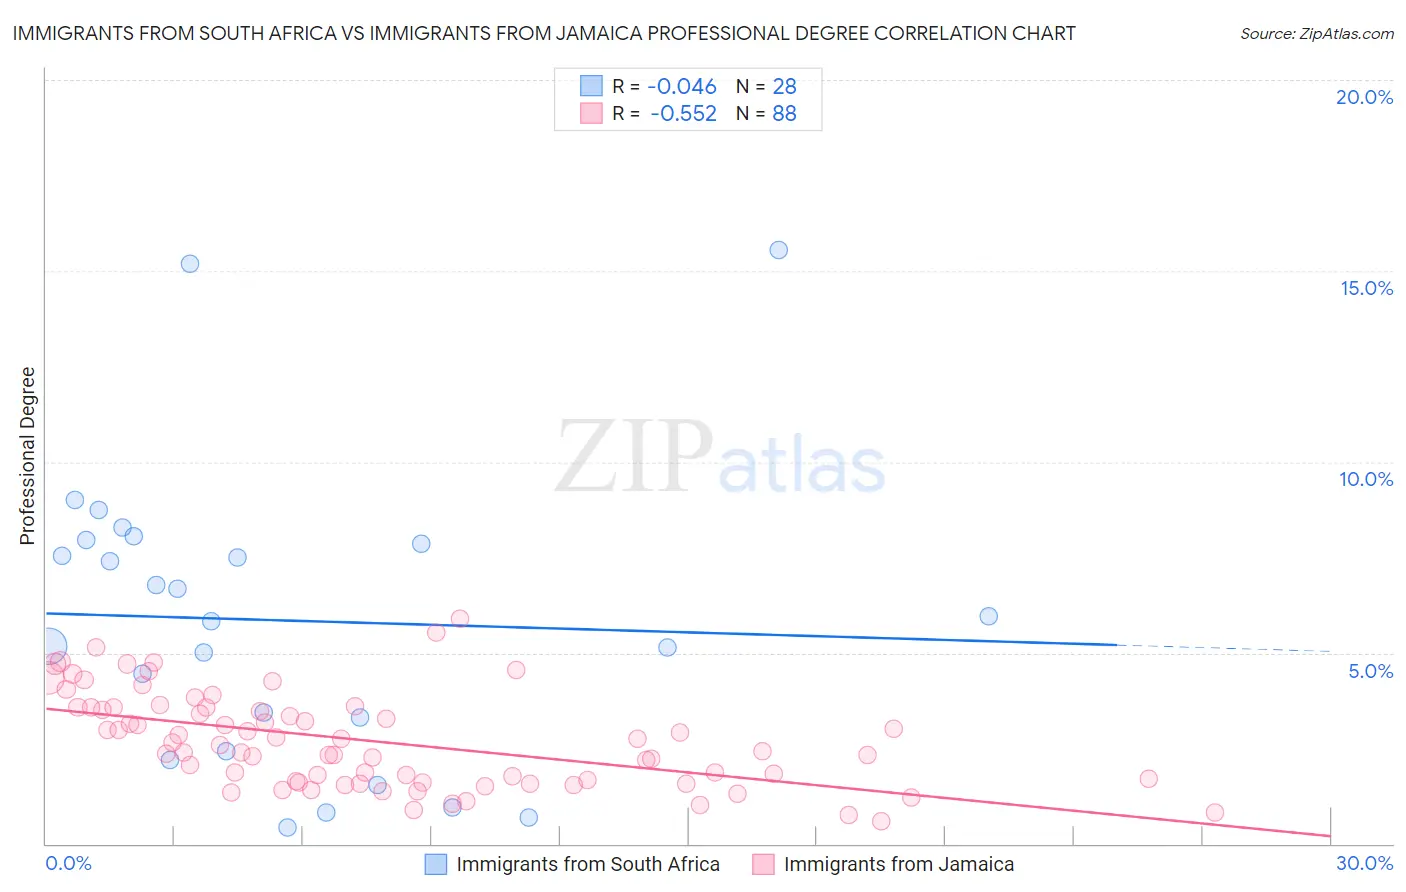 Immigrants from South Africa vs Immigrants from Jamaica Professional Degree